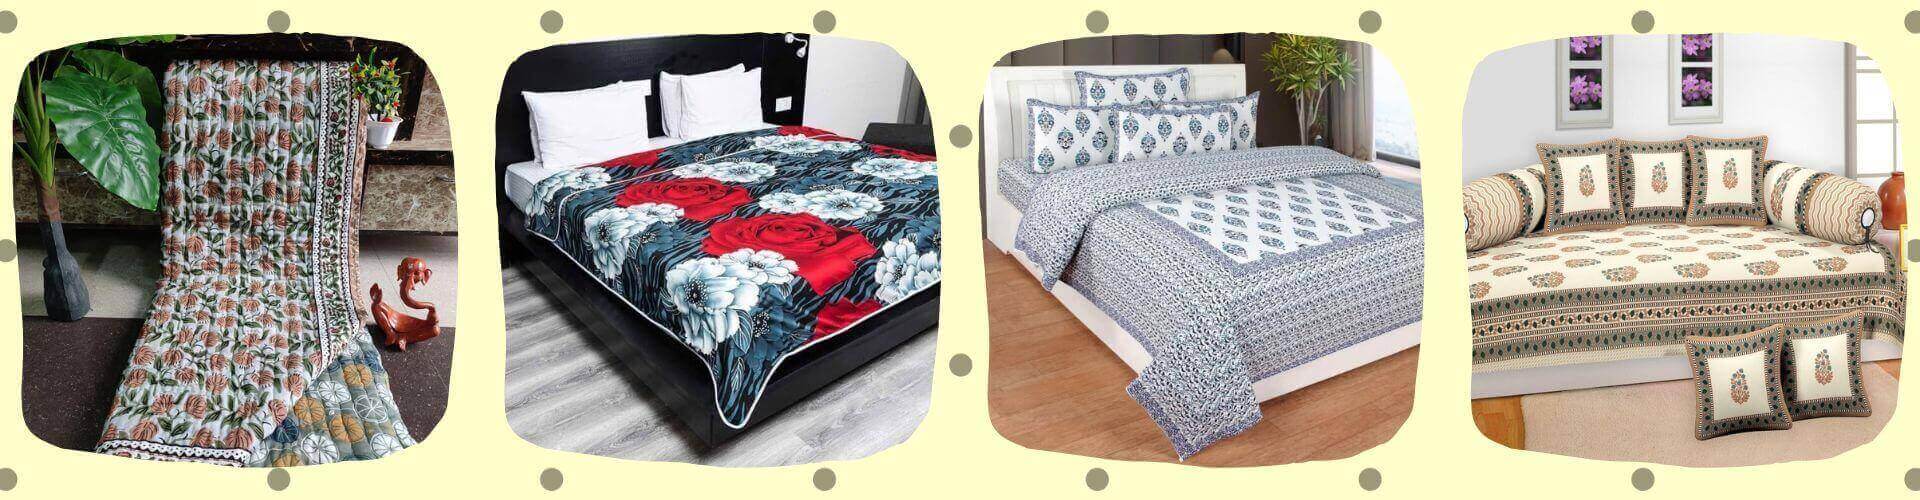 Why Jaipuri And Sanganeri Print Bedsheets Are Everyone's Choice In India?